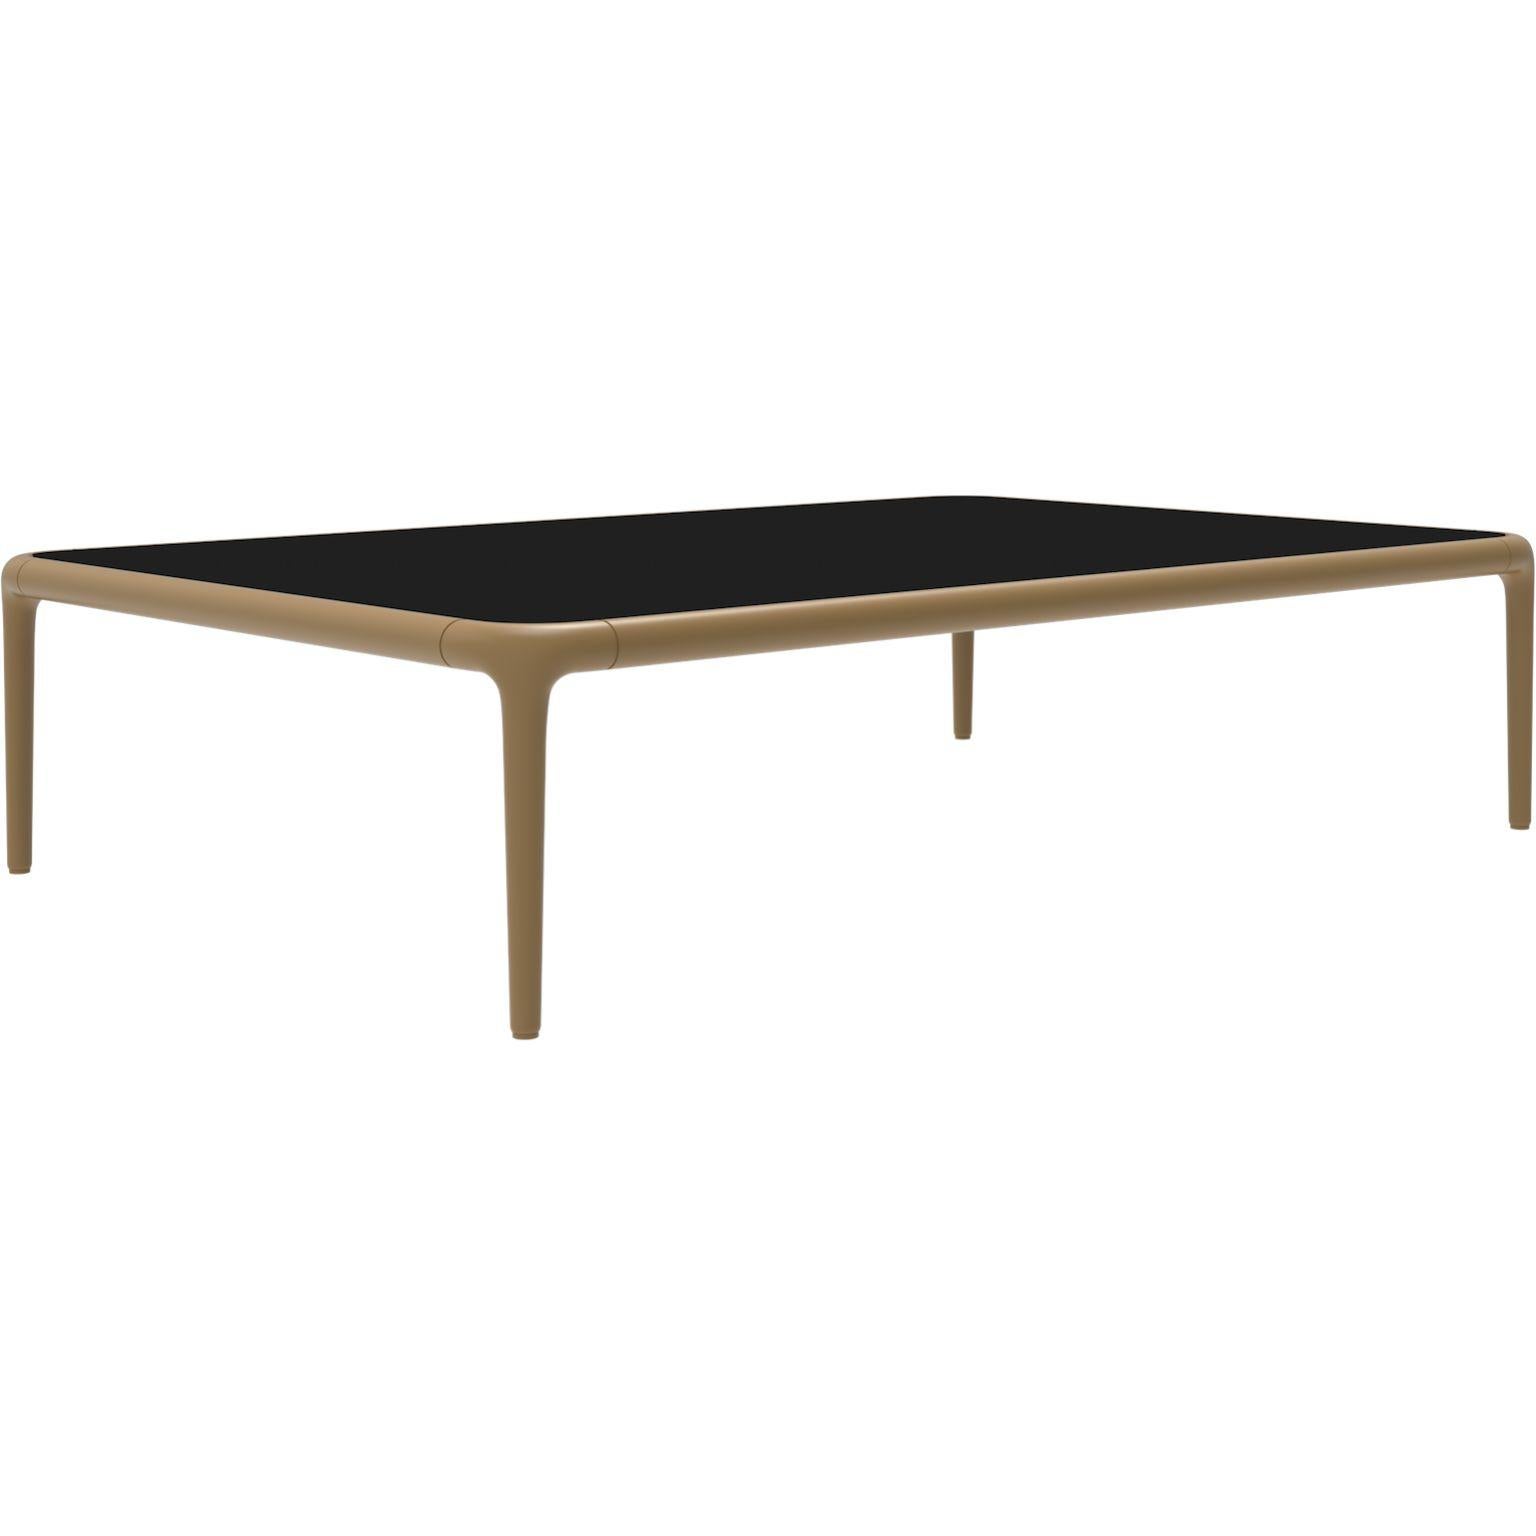 Xaloc gold coffee table 120 with glass top by MOWEE
Dimensions: D120 x W80 x H28 cm
Materials: Aluminum, tinted tempered glass top.
Also available in different aluminum colors and finishes (HPL Black Edge or Neolith).

Xaloc synthesizes the